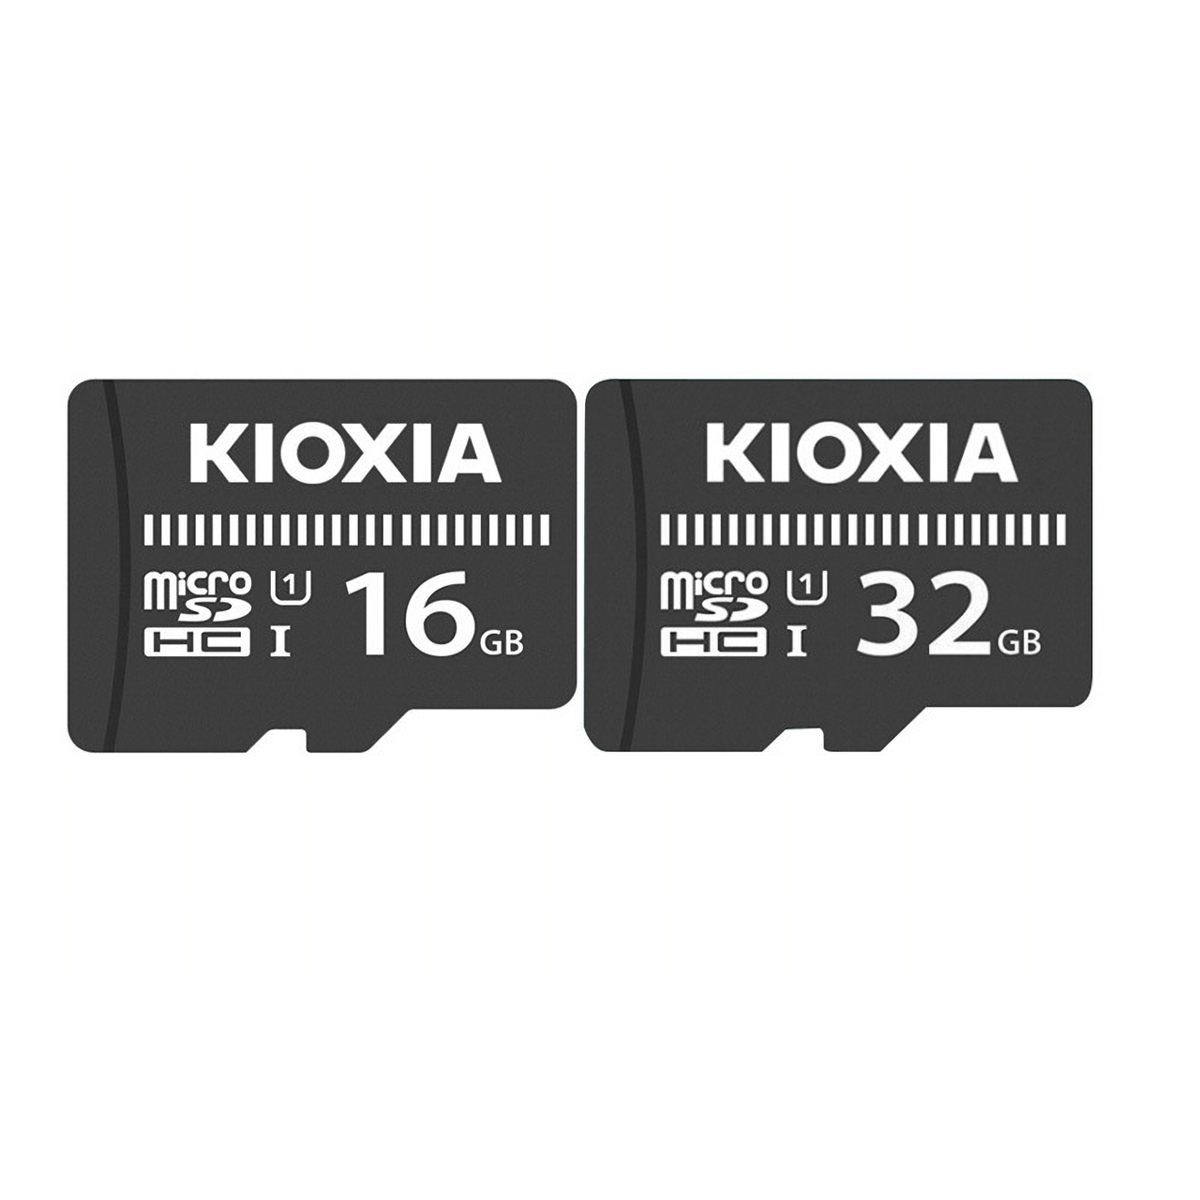 KIOXIA-C10-UHS-I-TF-Memory-Card-128G-64G-32G-100mbs-High-Speed-Micro-SD-Card-for-Mobile-Phone-Monito-1961659-1